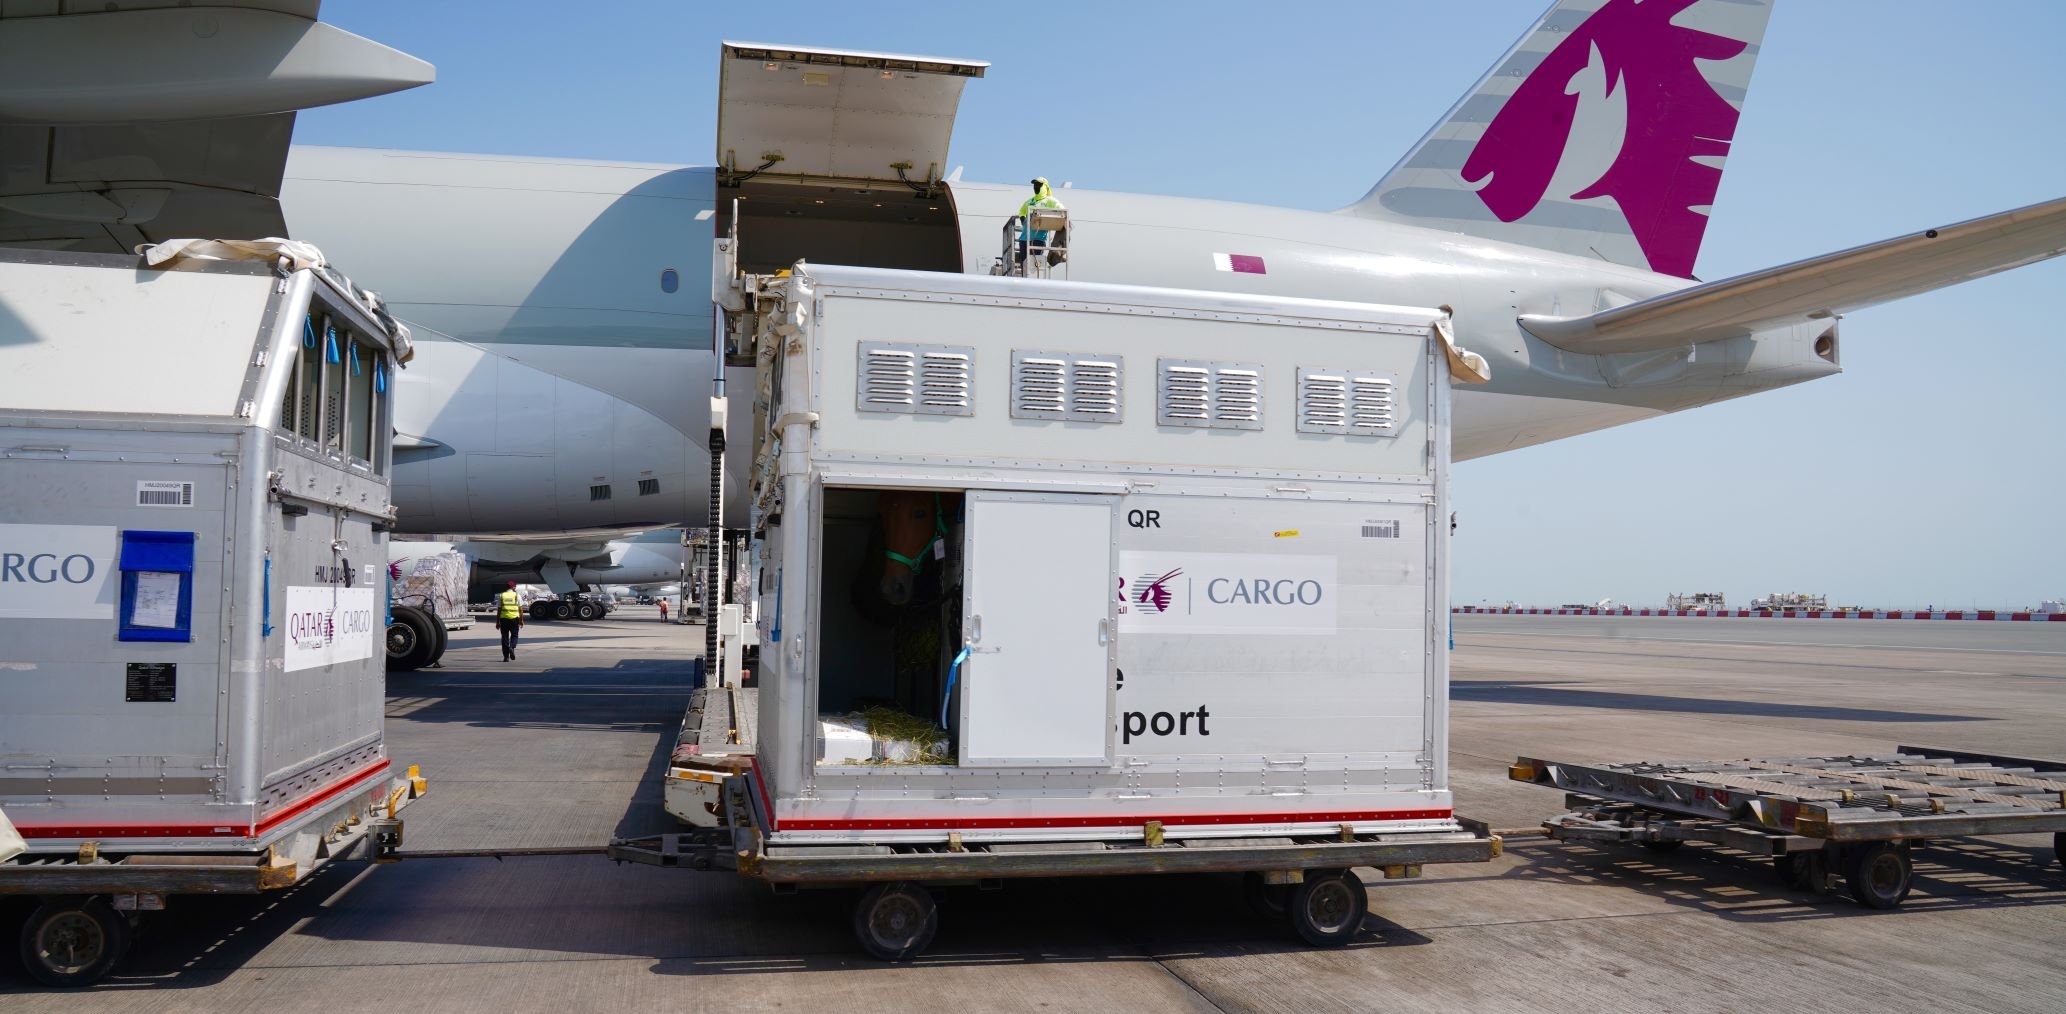 Qatar cargo horse transport ULD in front of plane